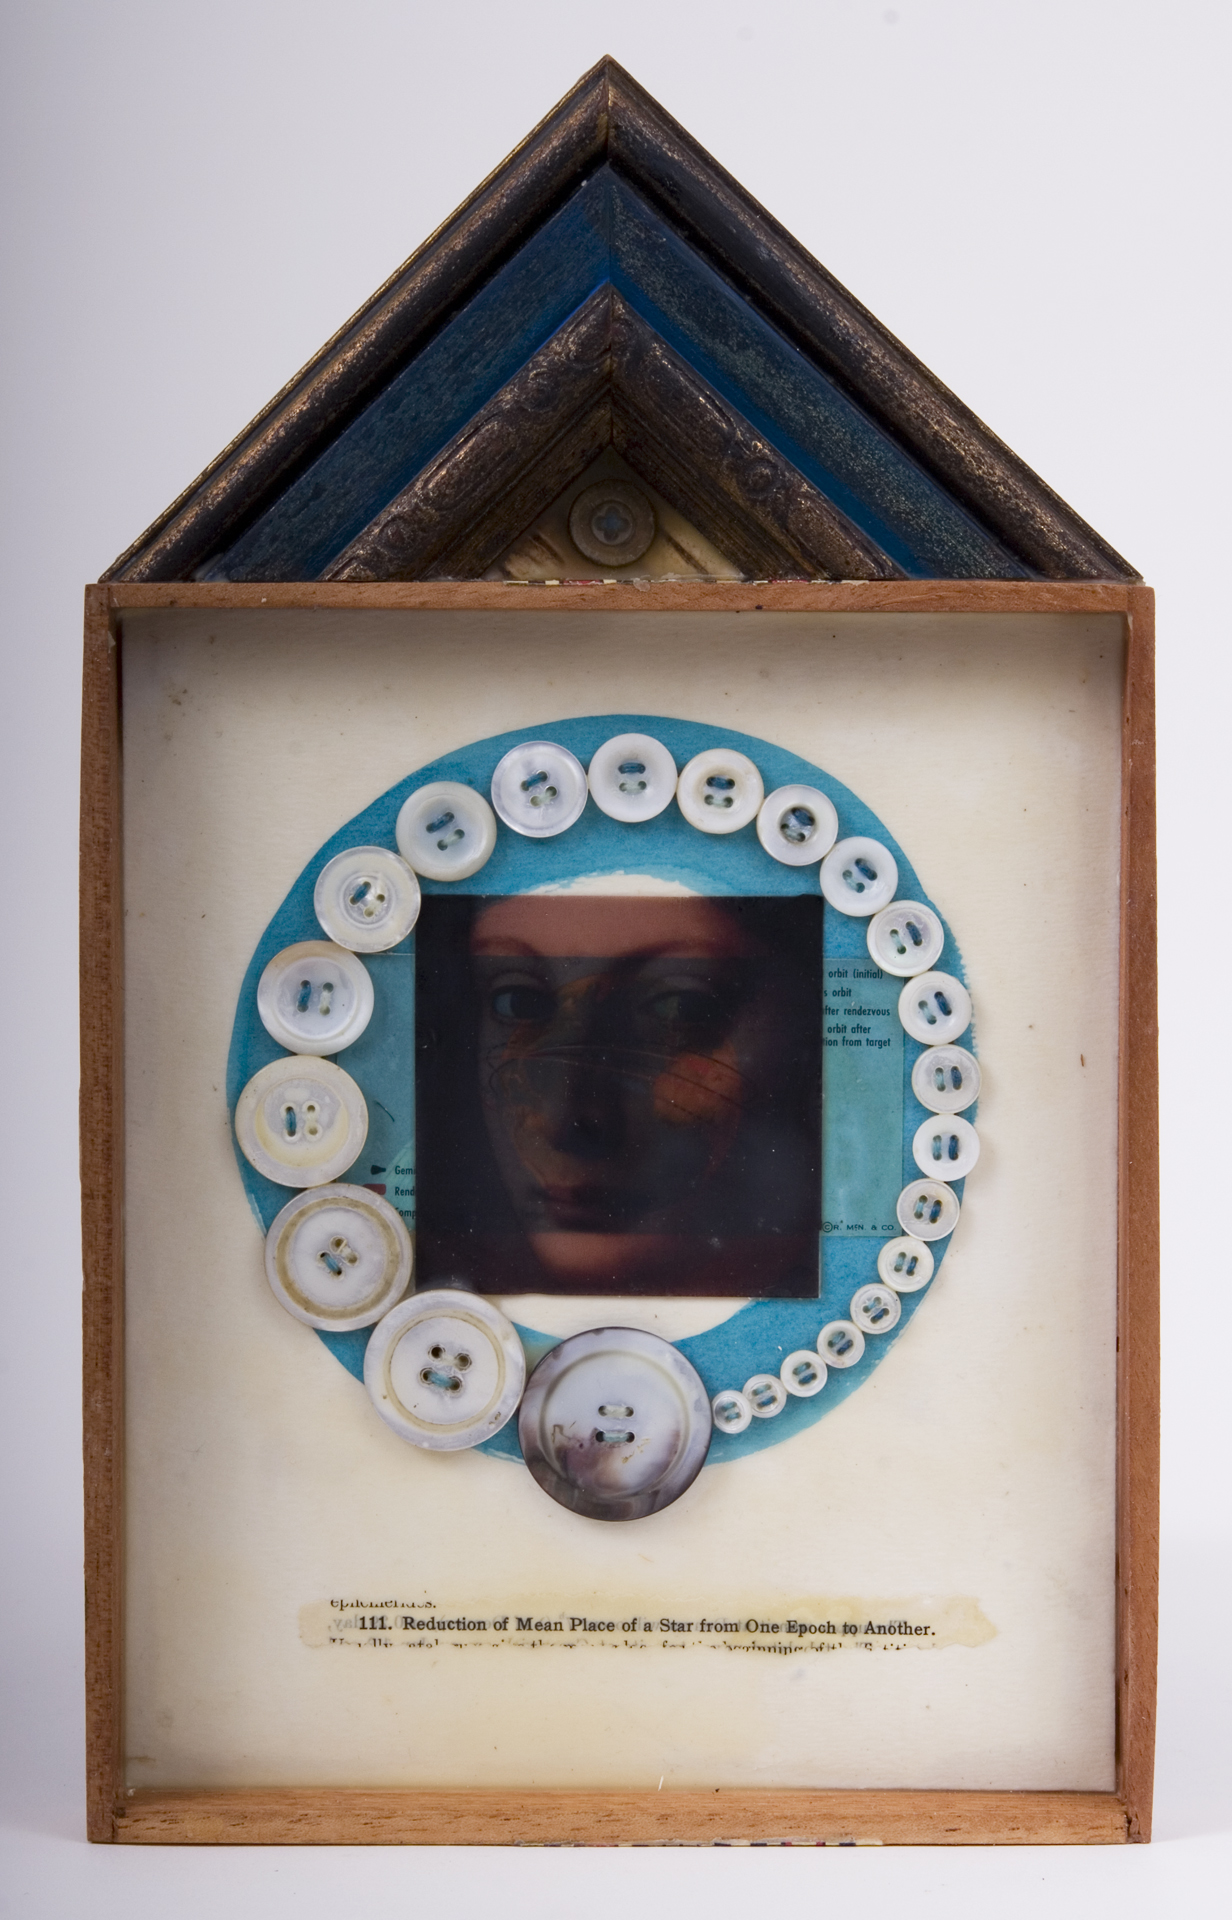 \"111. Reduction of Mean Place of a Star from One Epoch to Another\"
mixed-media assemblage
13 x 7.75 x 1
2009
SOLD
Cigar box, frame sample, birch bark, mother of pearl buttons, transparency, ink, wax, astronomy text on watercolor paper